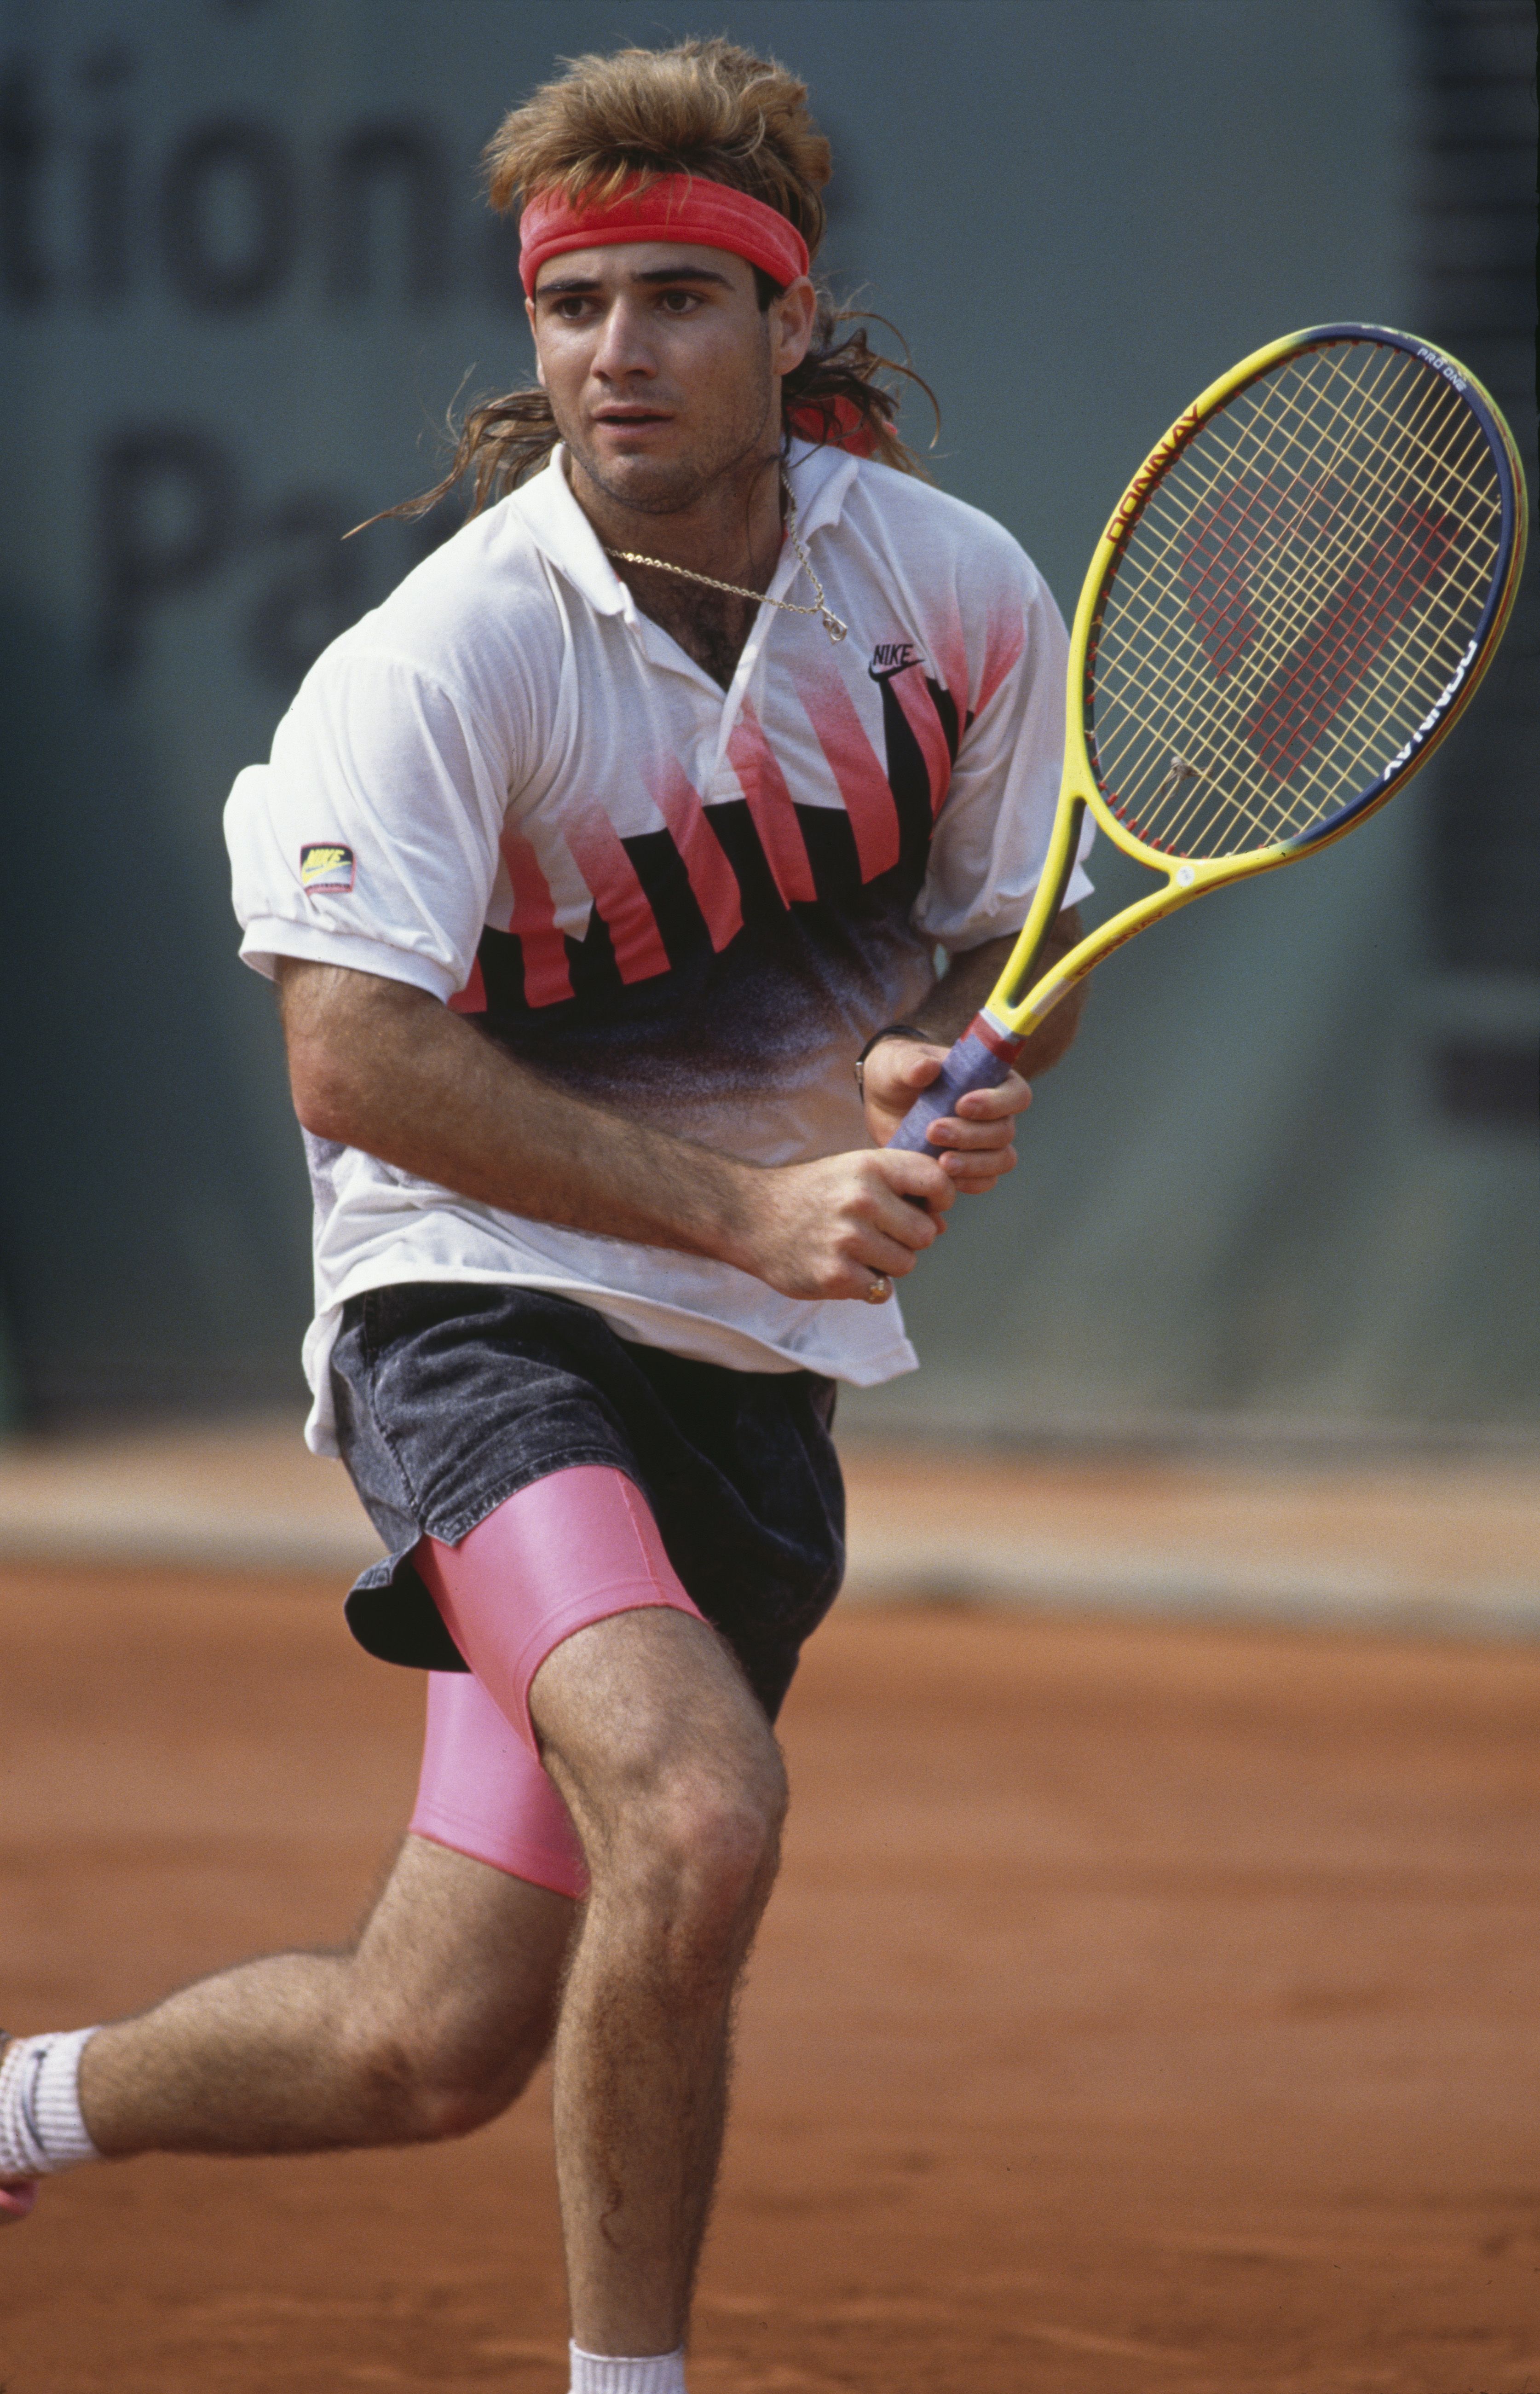 andre agassi jeans shorts